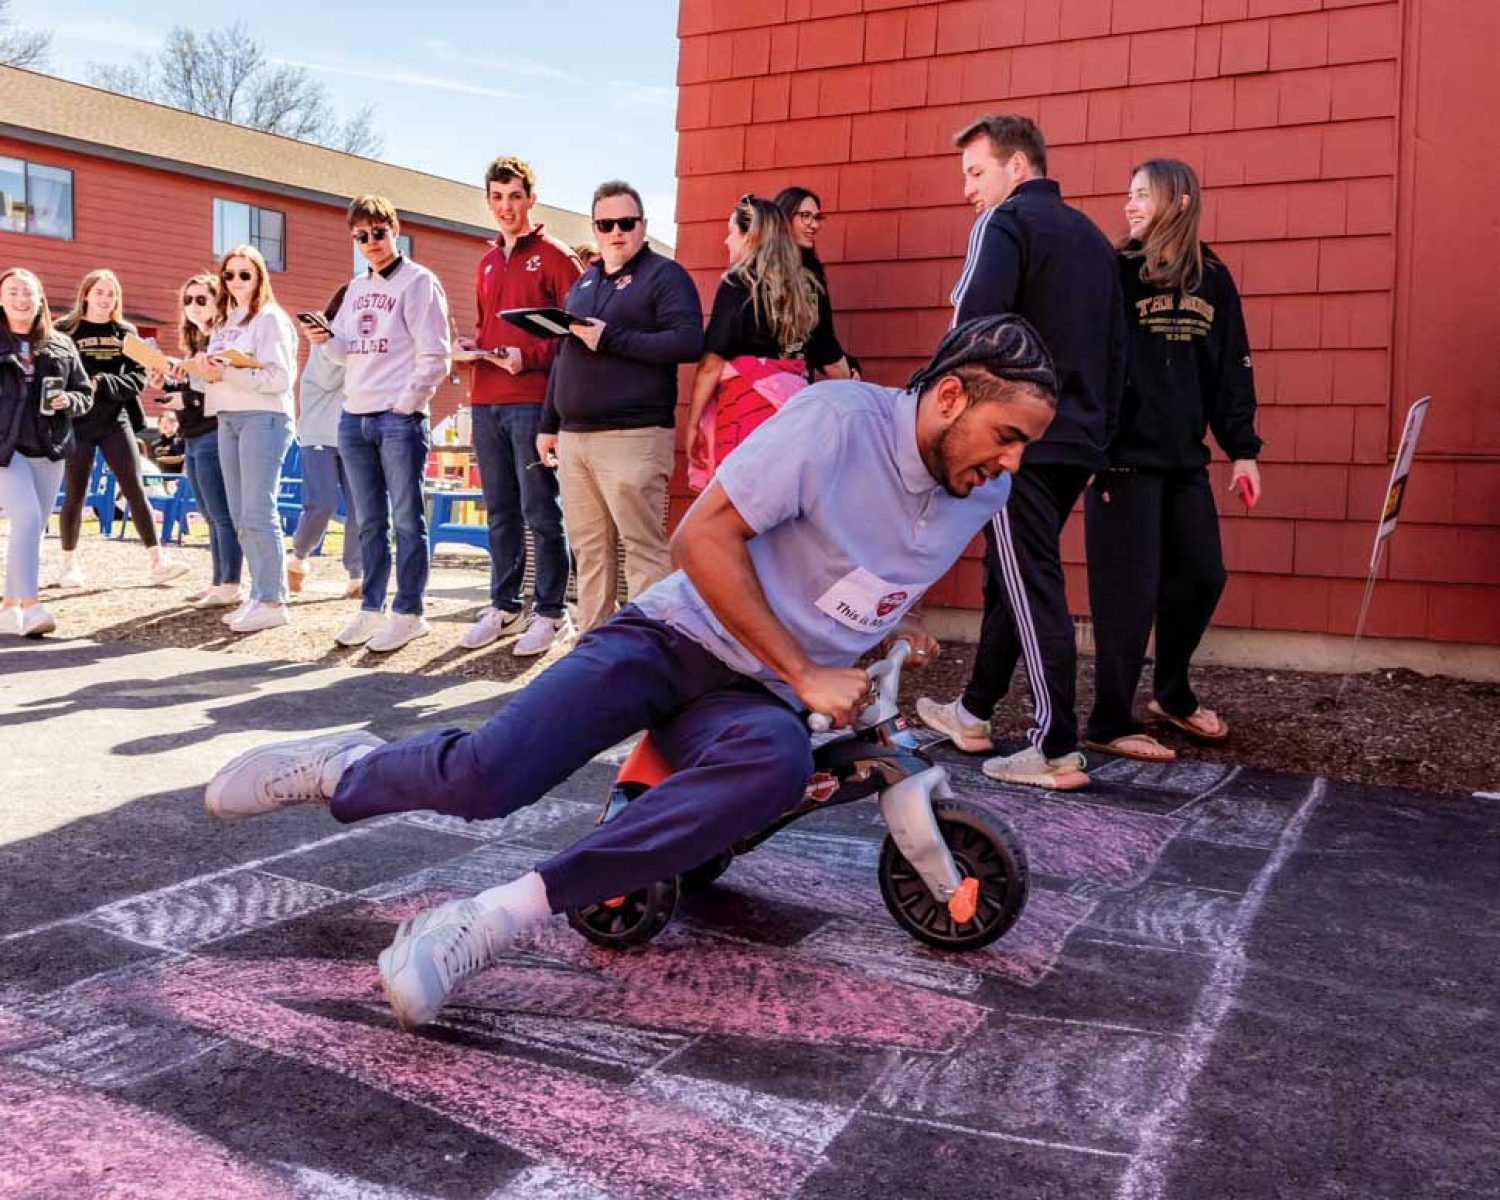 Miles Hester ’24 crosses a chalk drawn finish line on a trike with fellow student onlookers.